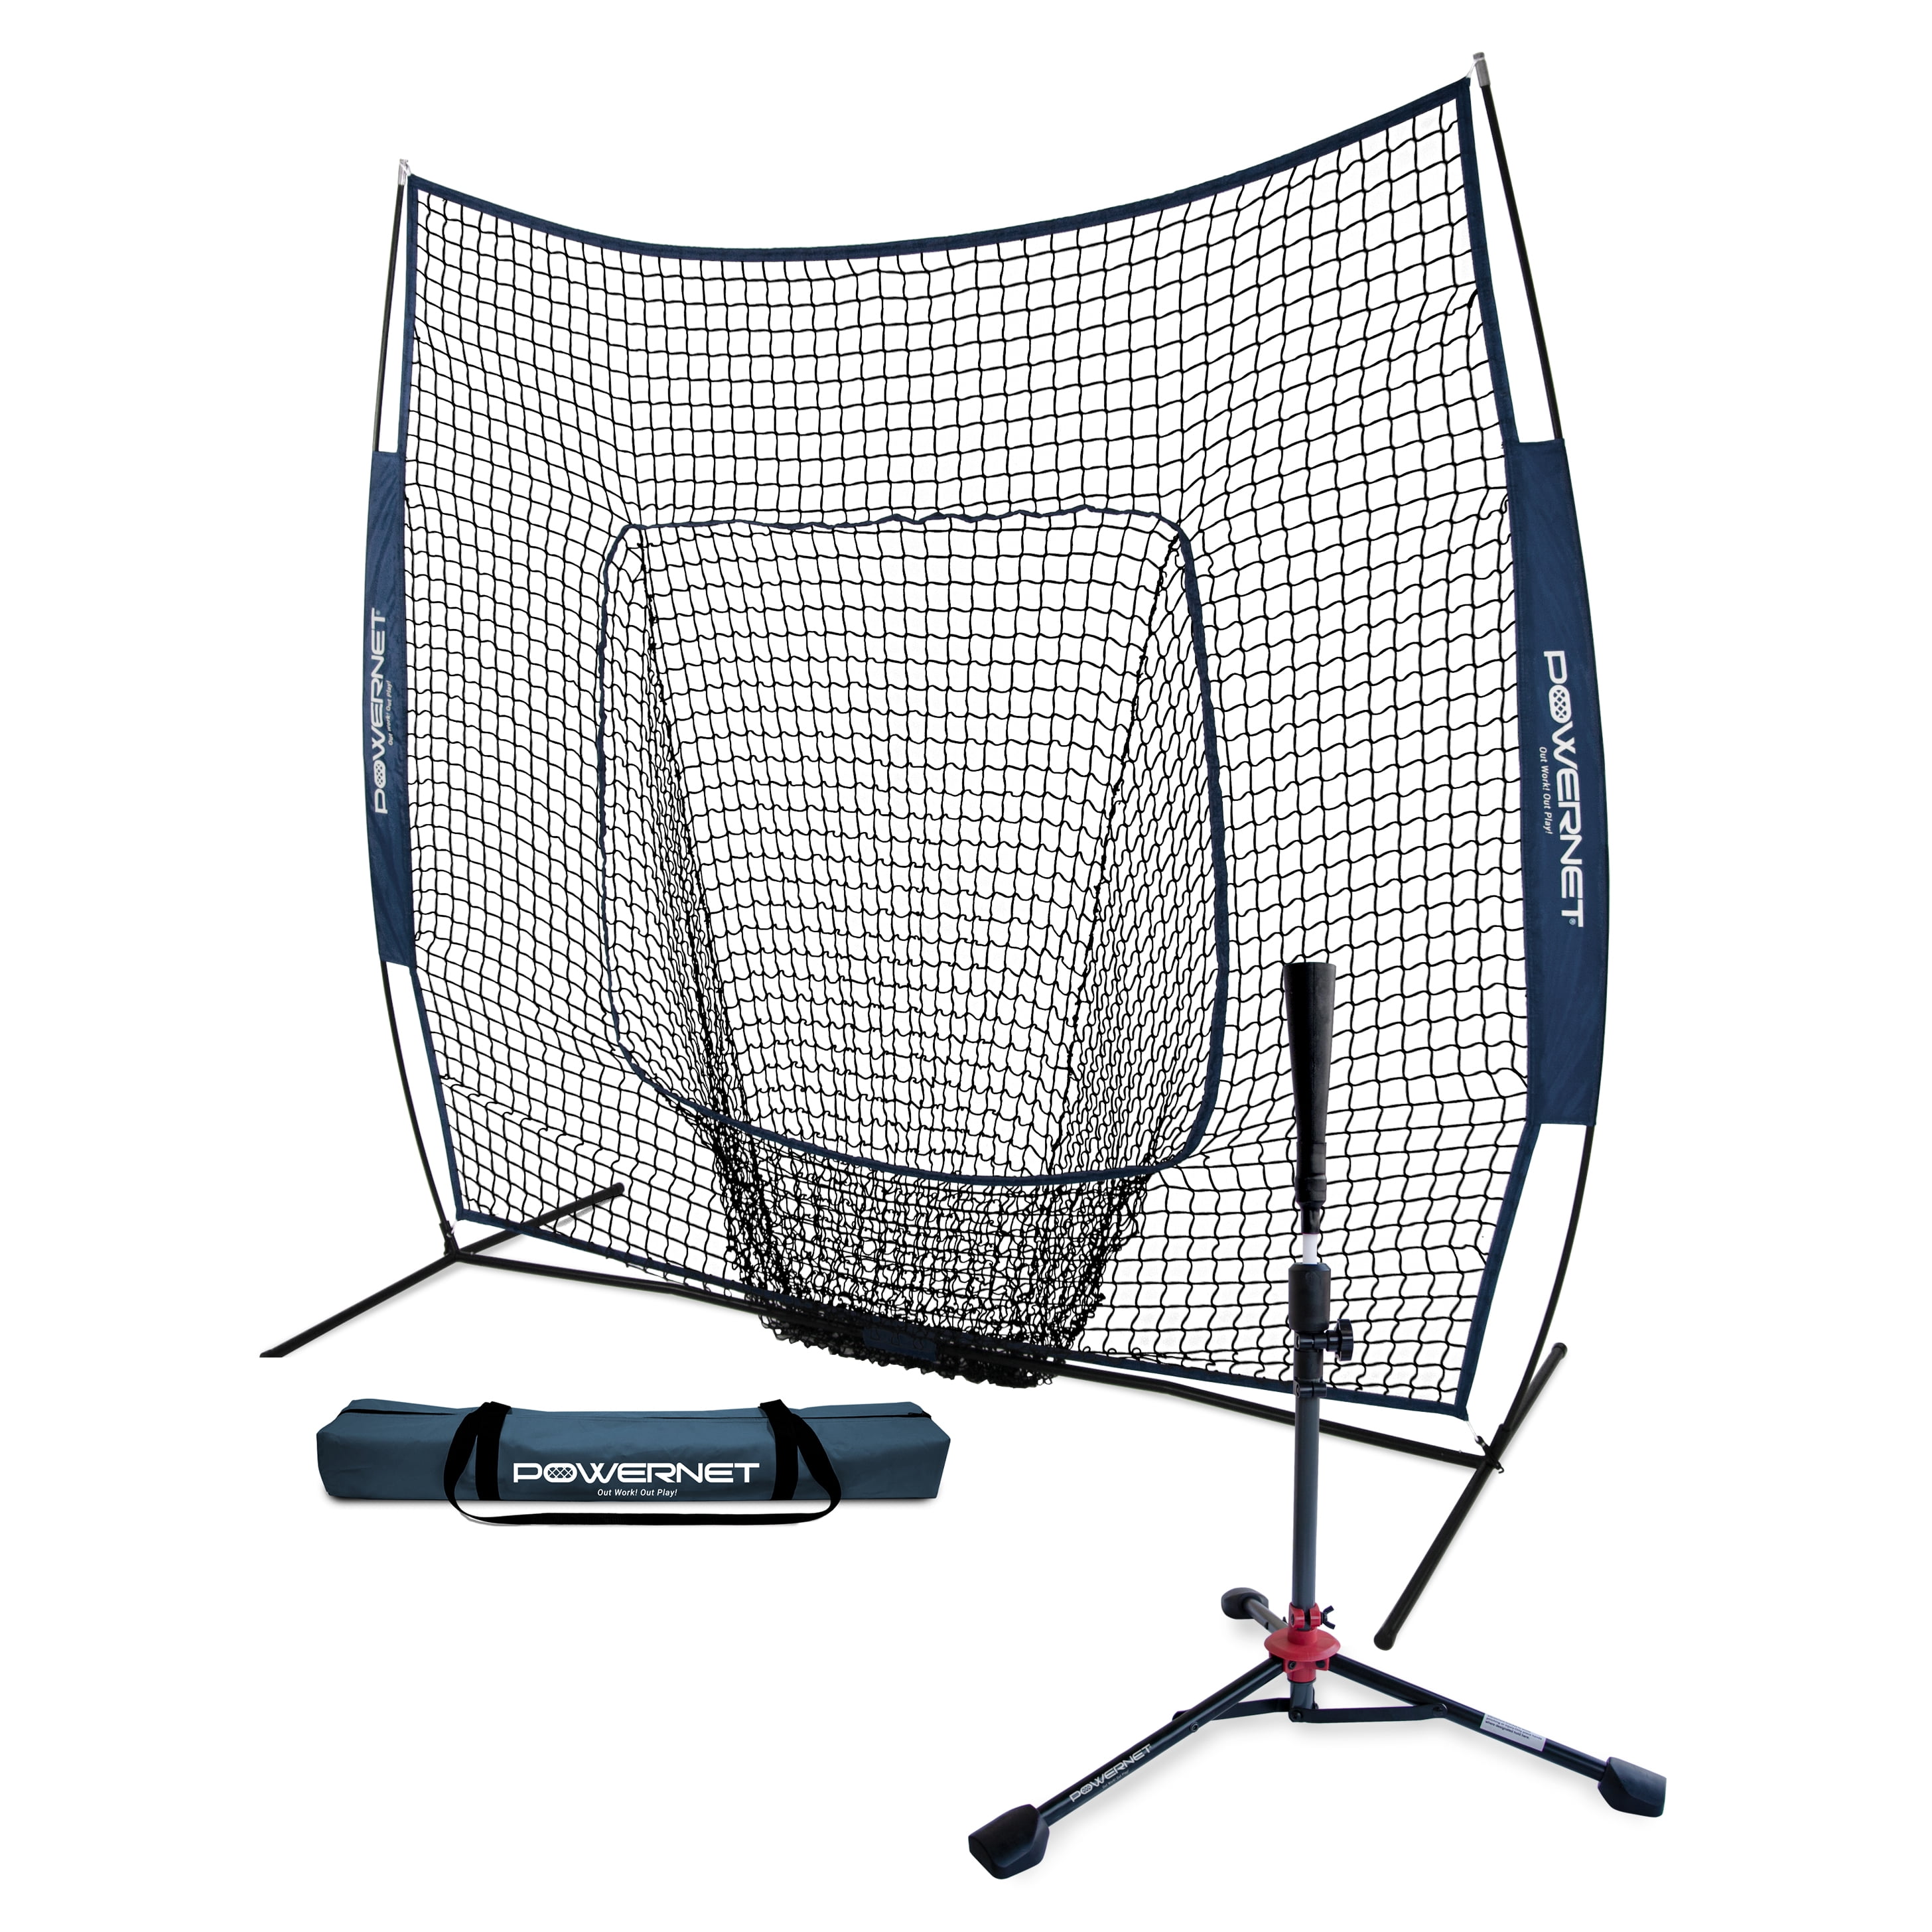 Training Aid Batting Pitching PowerNet Baseball Softball Practice Net 7x7 with Travel Tee Backstop Fielding Practice Hitting Large Mouth Bow Frame Portable Training Equipment Bundle 